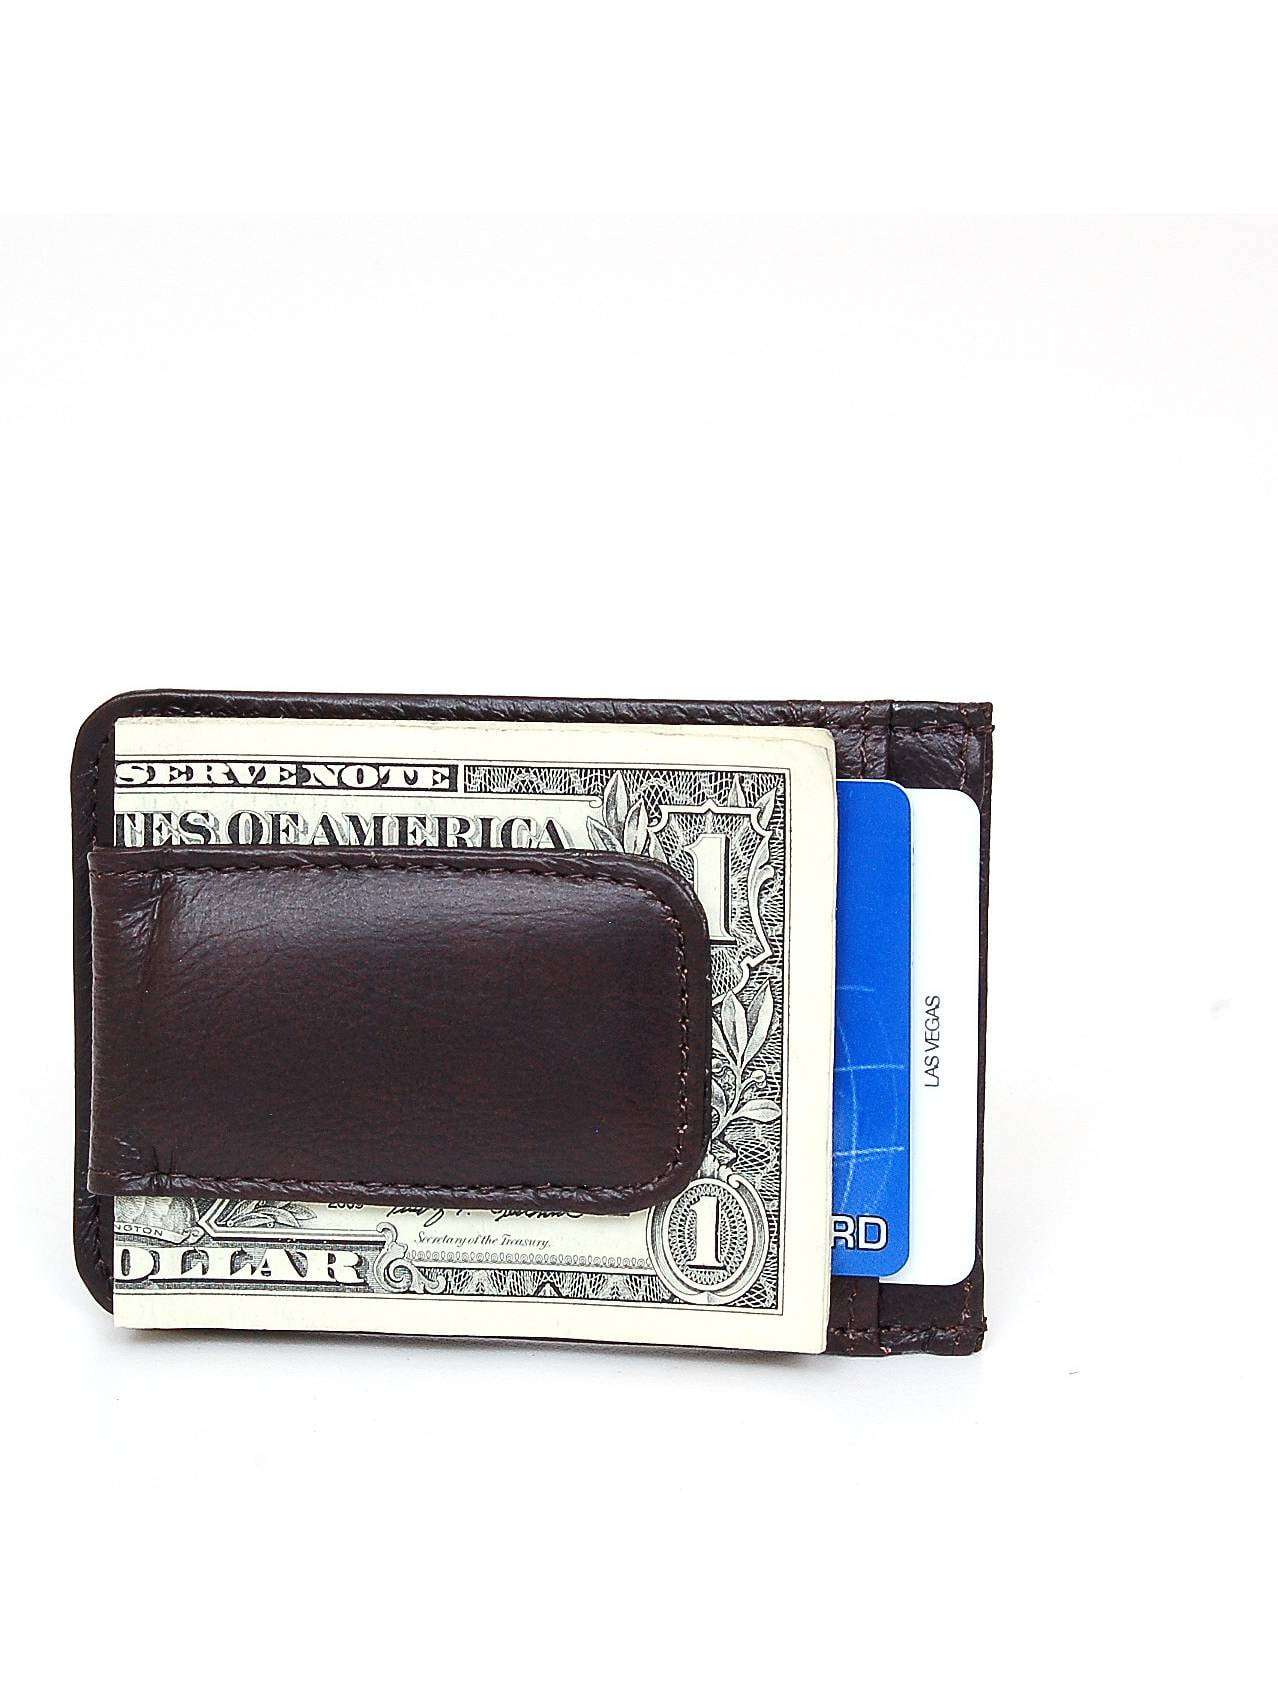 Genuine Leather Thin ID Card Holder Coin Purse Money Clip Wallet Mens Black 